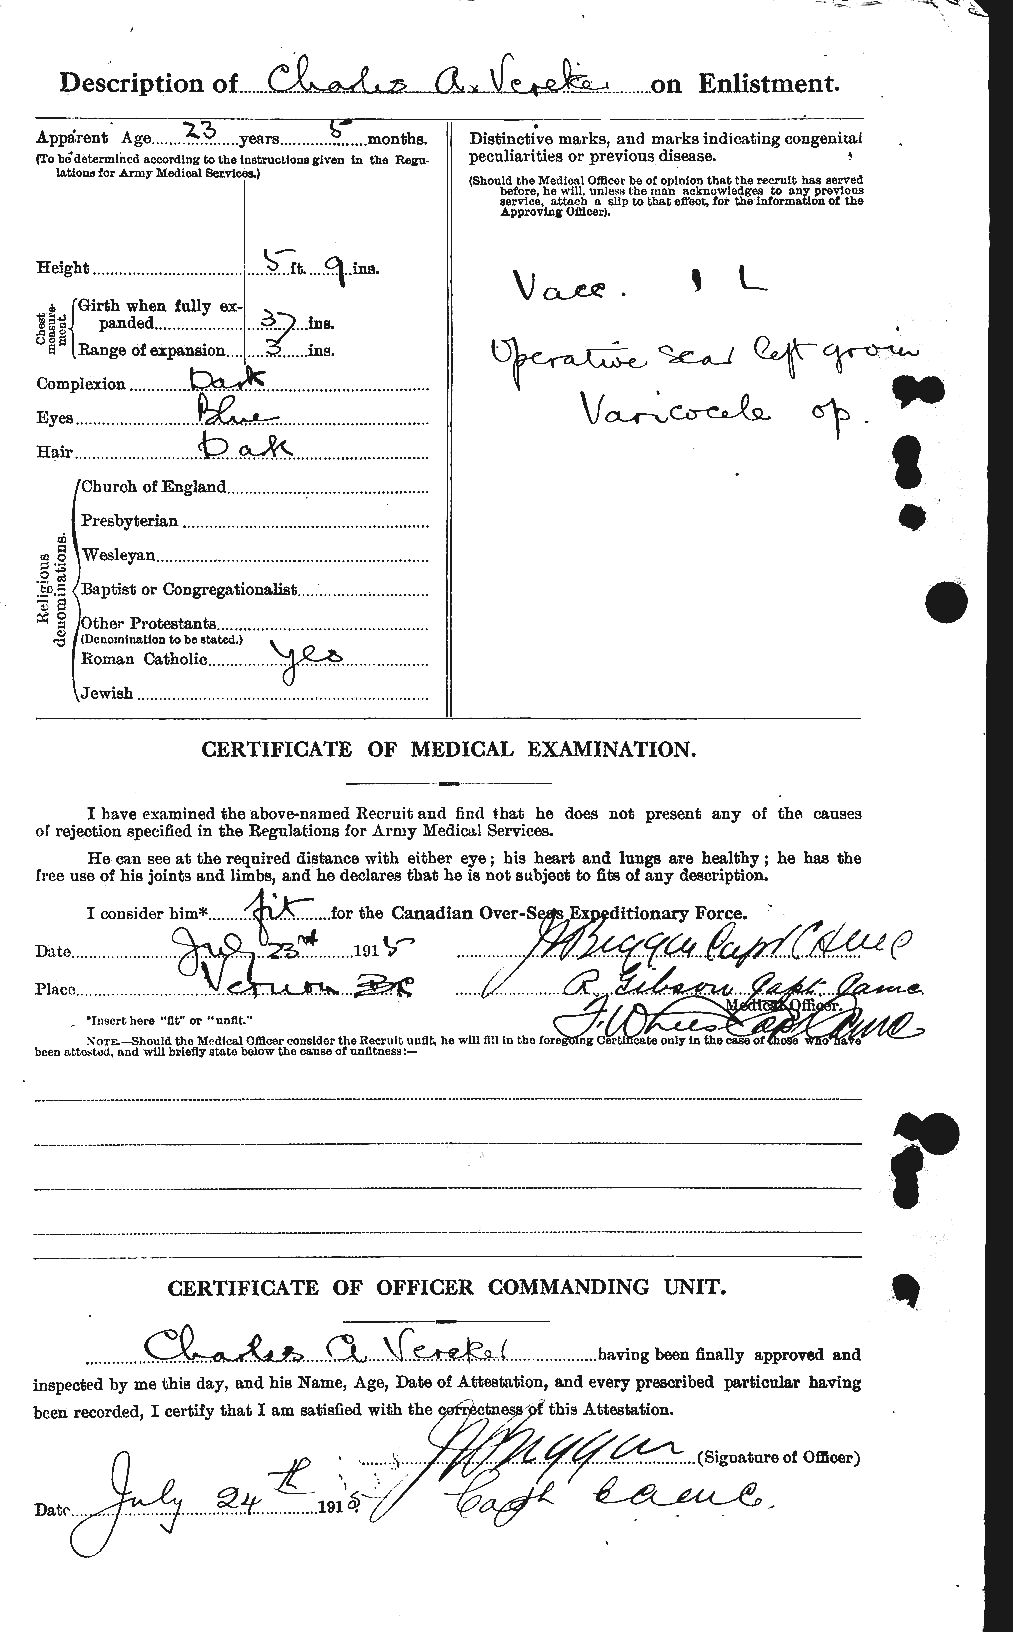 Personnel Records of the First World War - CEF 649443b